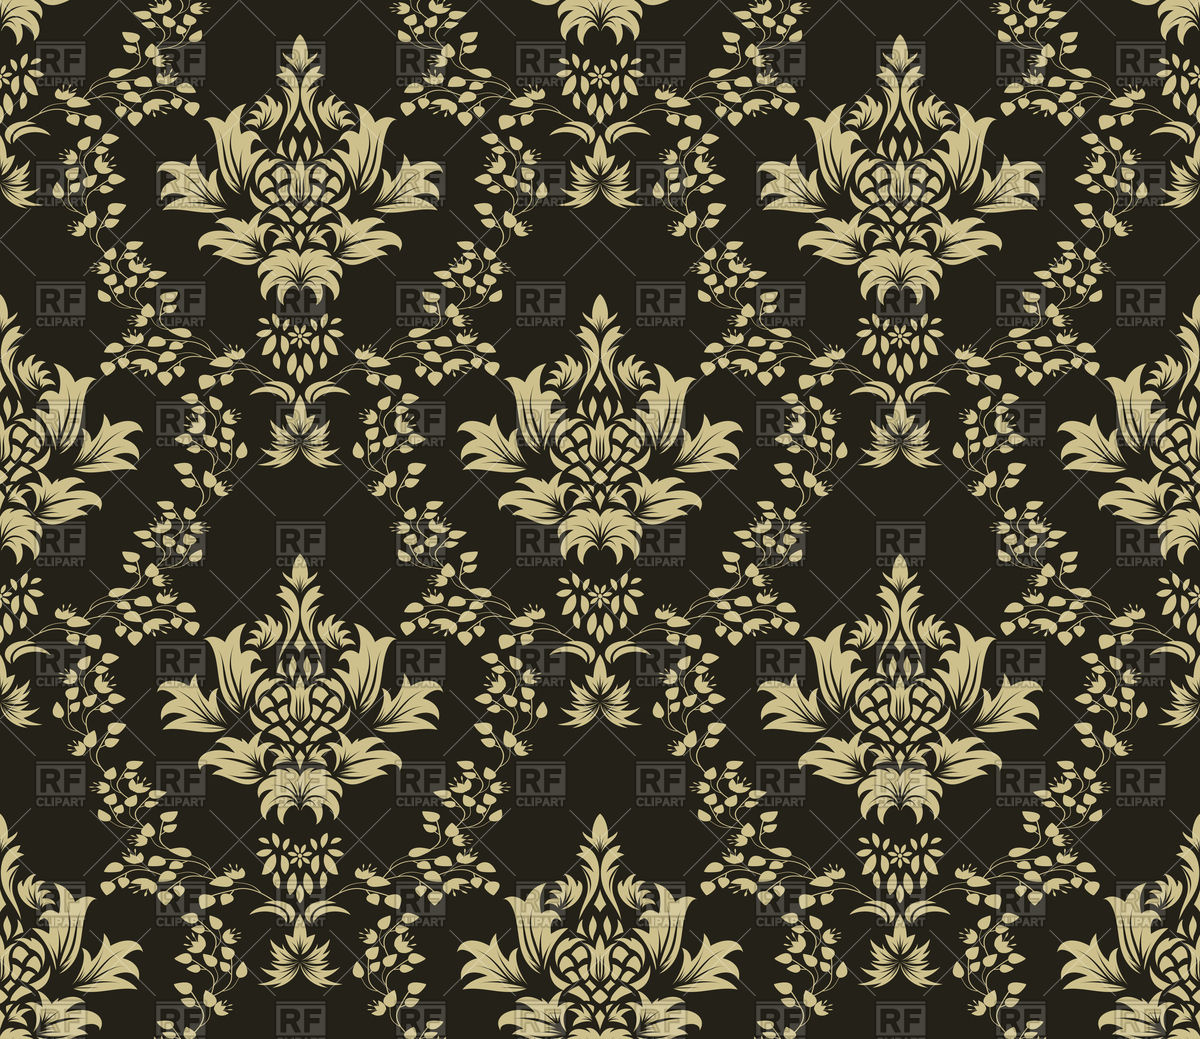 Damask Rich Seamless Wallpaper Pattern Vector Image Of Background